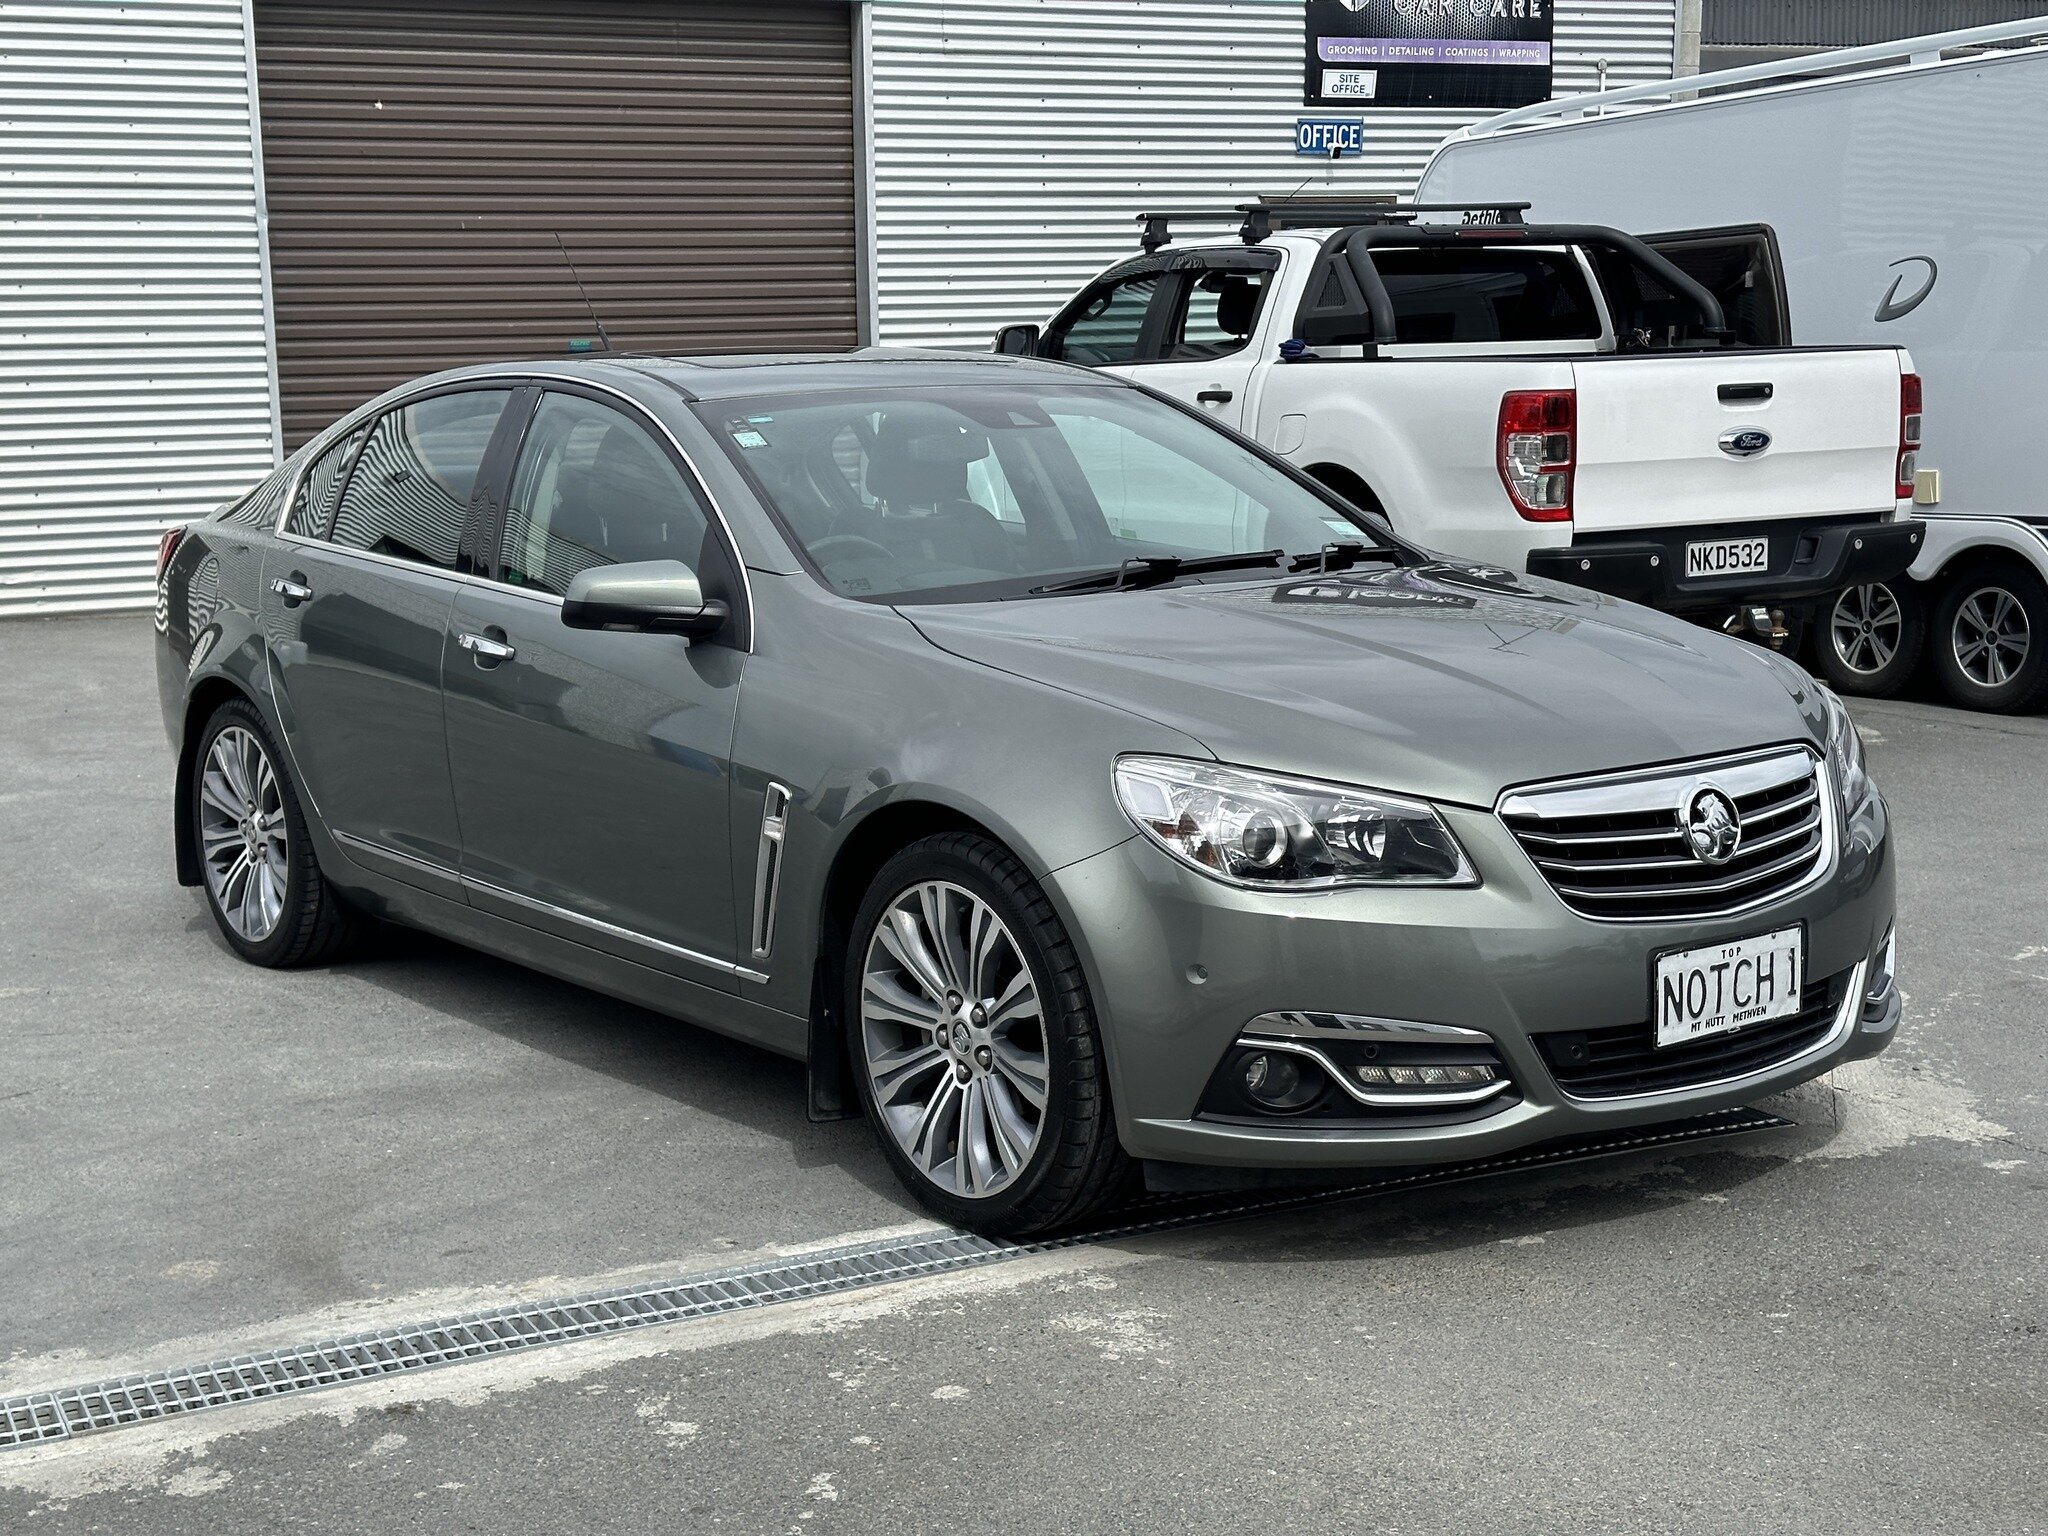 🔥Check this out!🔥

Breathing new life into this 2013 Holden Calais and protecting it for the future.🚗

The owner brought this awesome car in as he wanted to look after it properly as he would be keeping it long term. This was the perfect opportuni